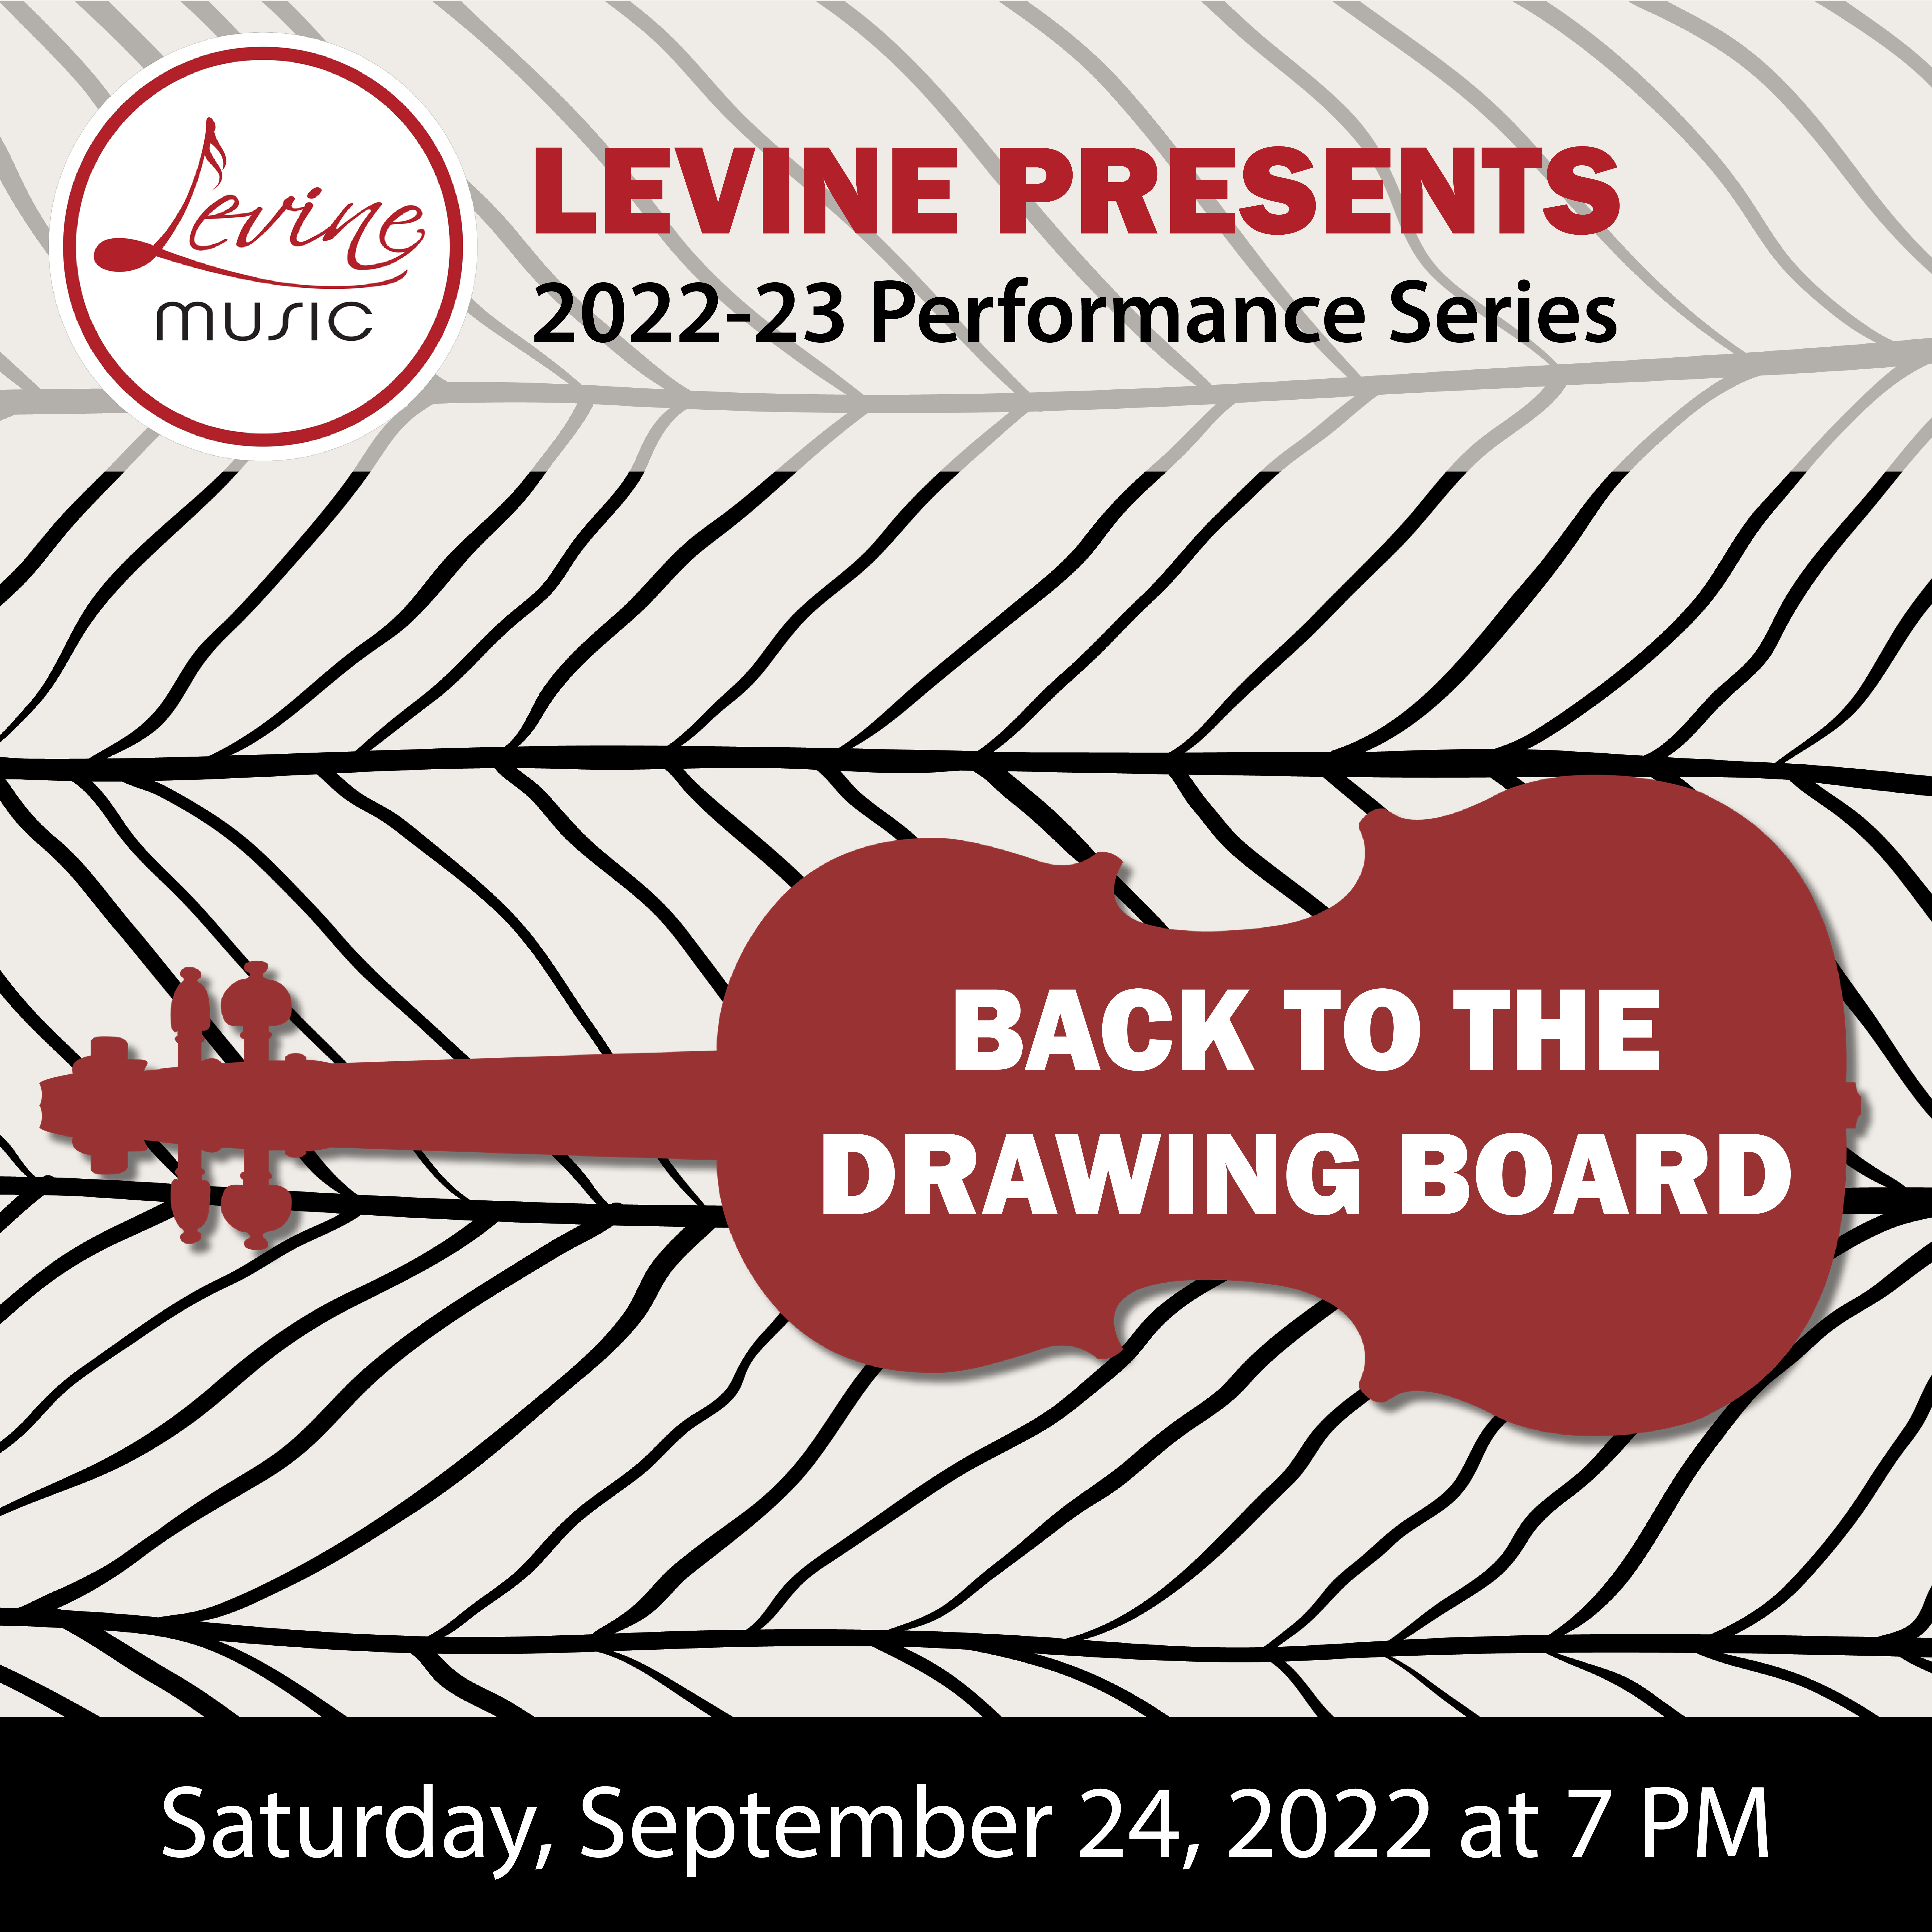 Levine Presents 2022 2023 Back to the Drawing Board